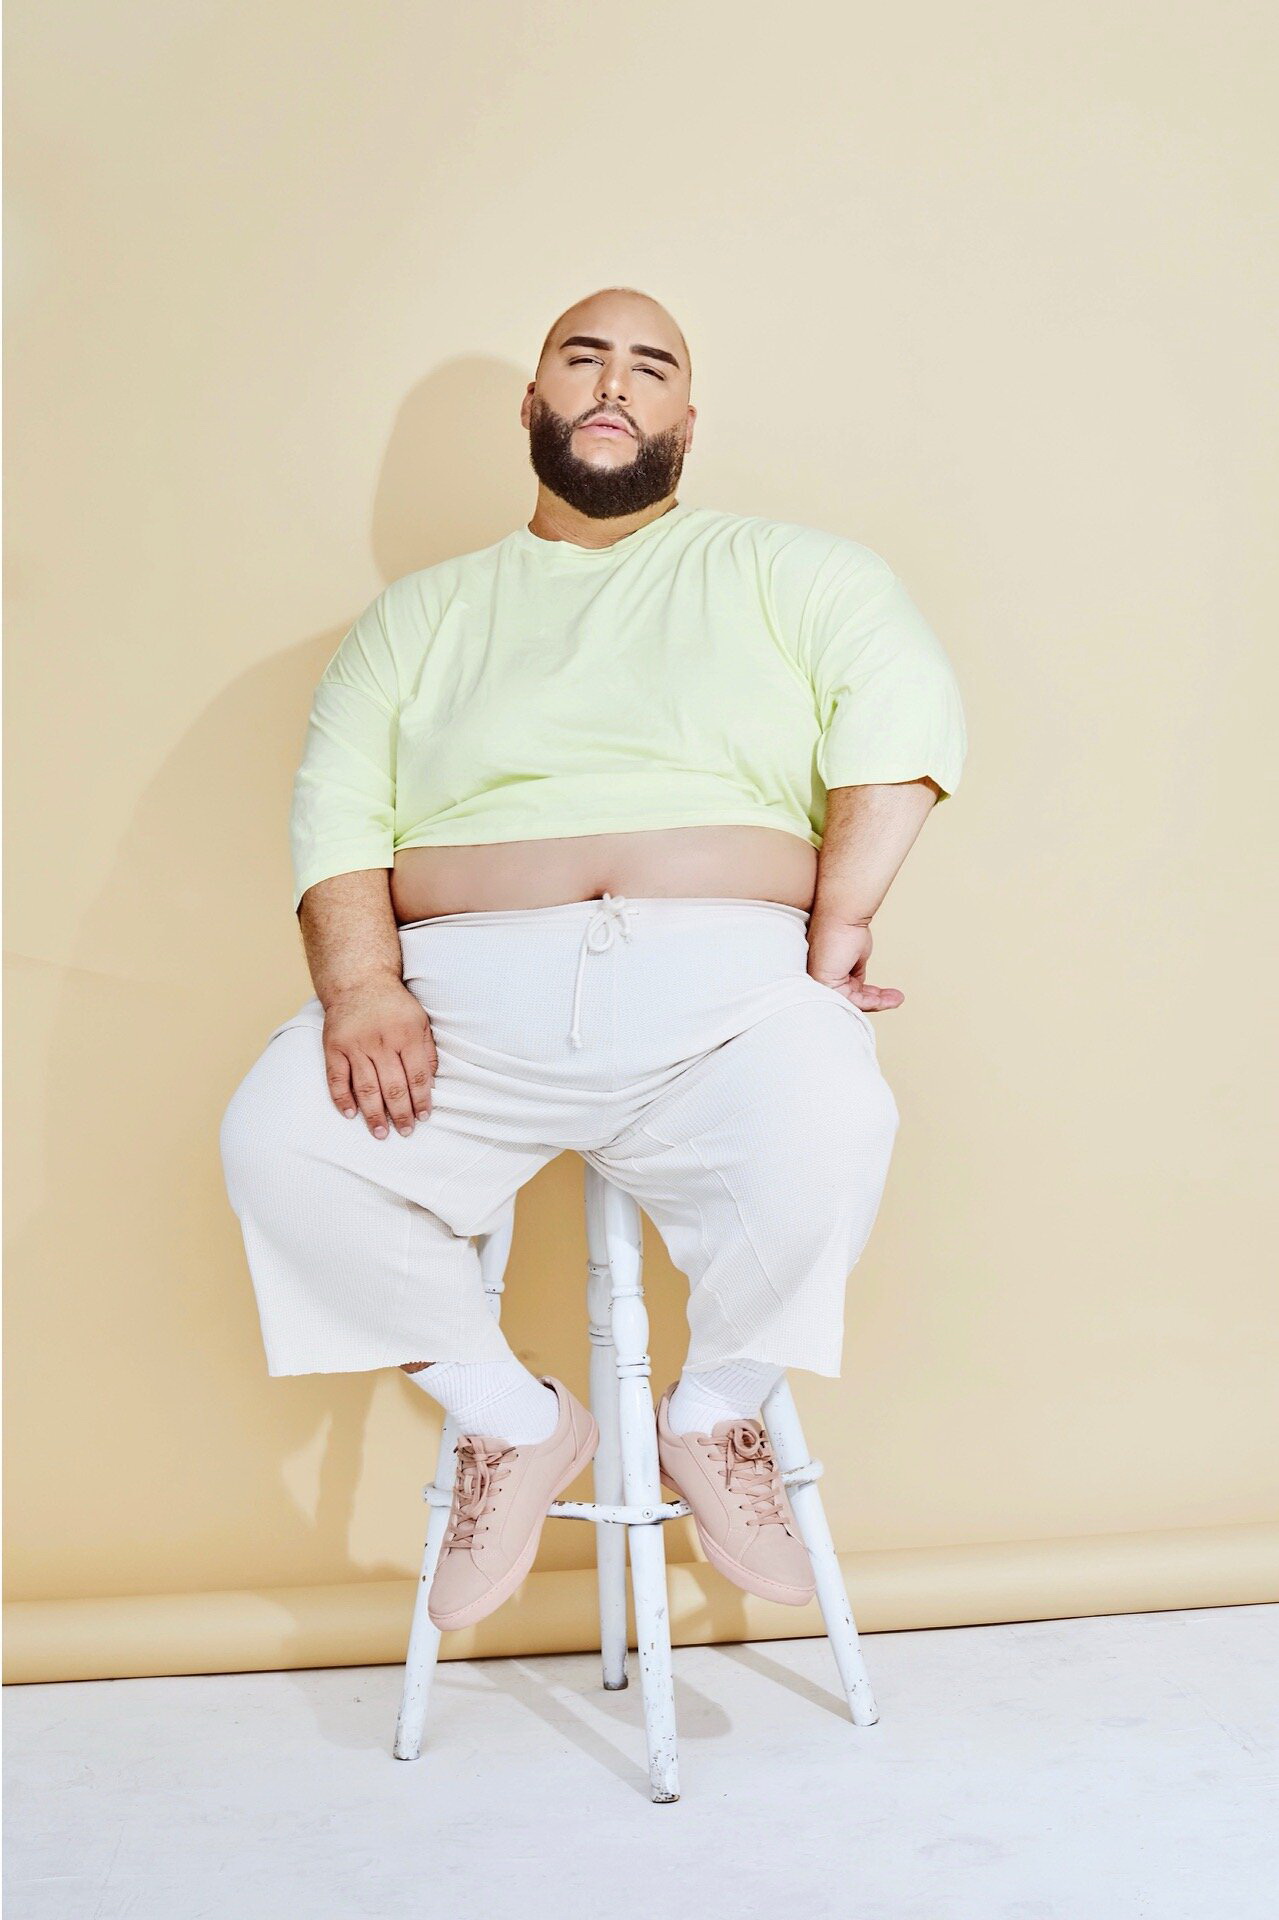 Ady is sitting on a white stool, against a beige wall wearing a mint t-shirt and white loose pants. His belly is partially uncovered. His left arm is bent on his hip and his right arm is relaxed along his body. He is sitting with his legs open. He is wearing white socks and light pink trainers.